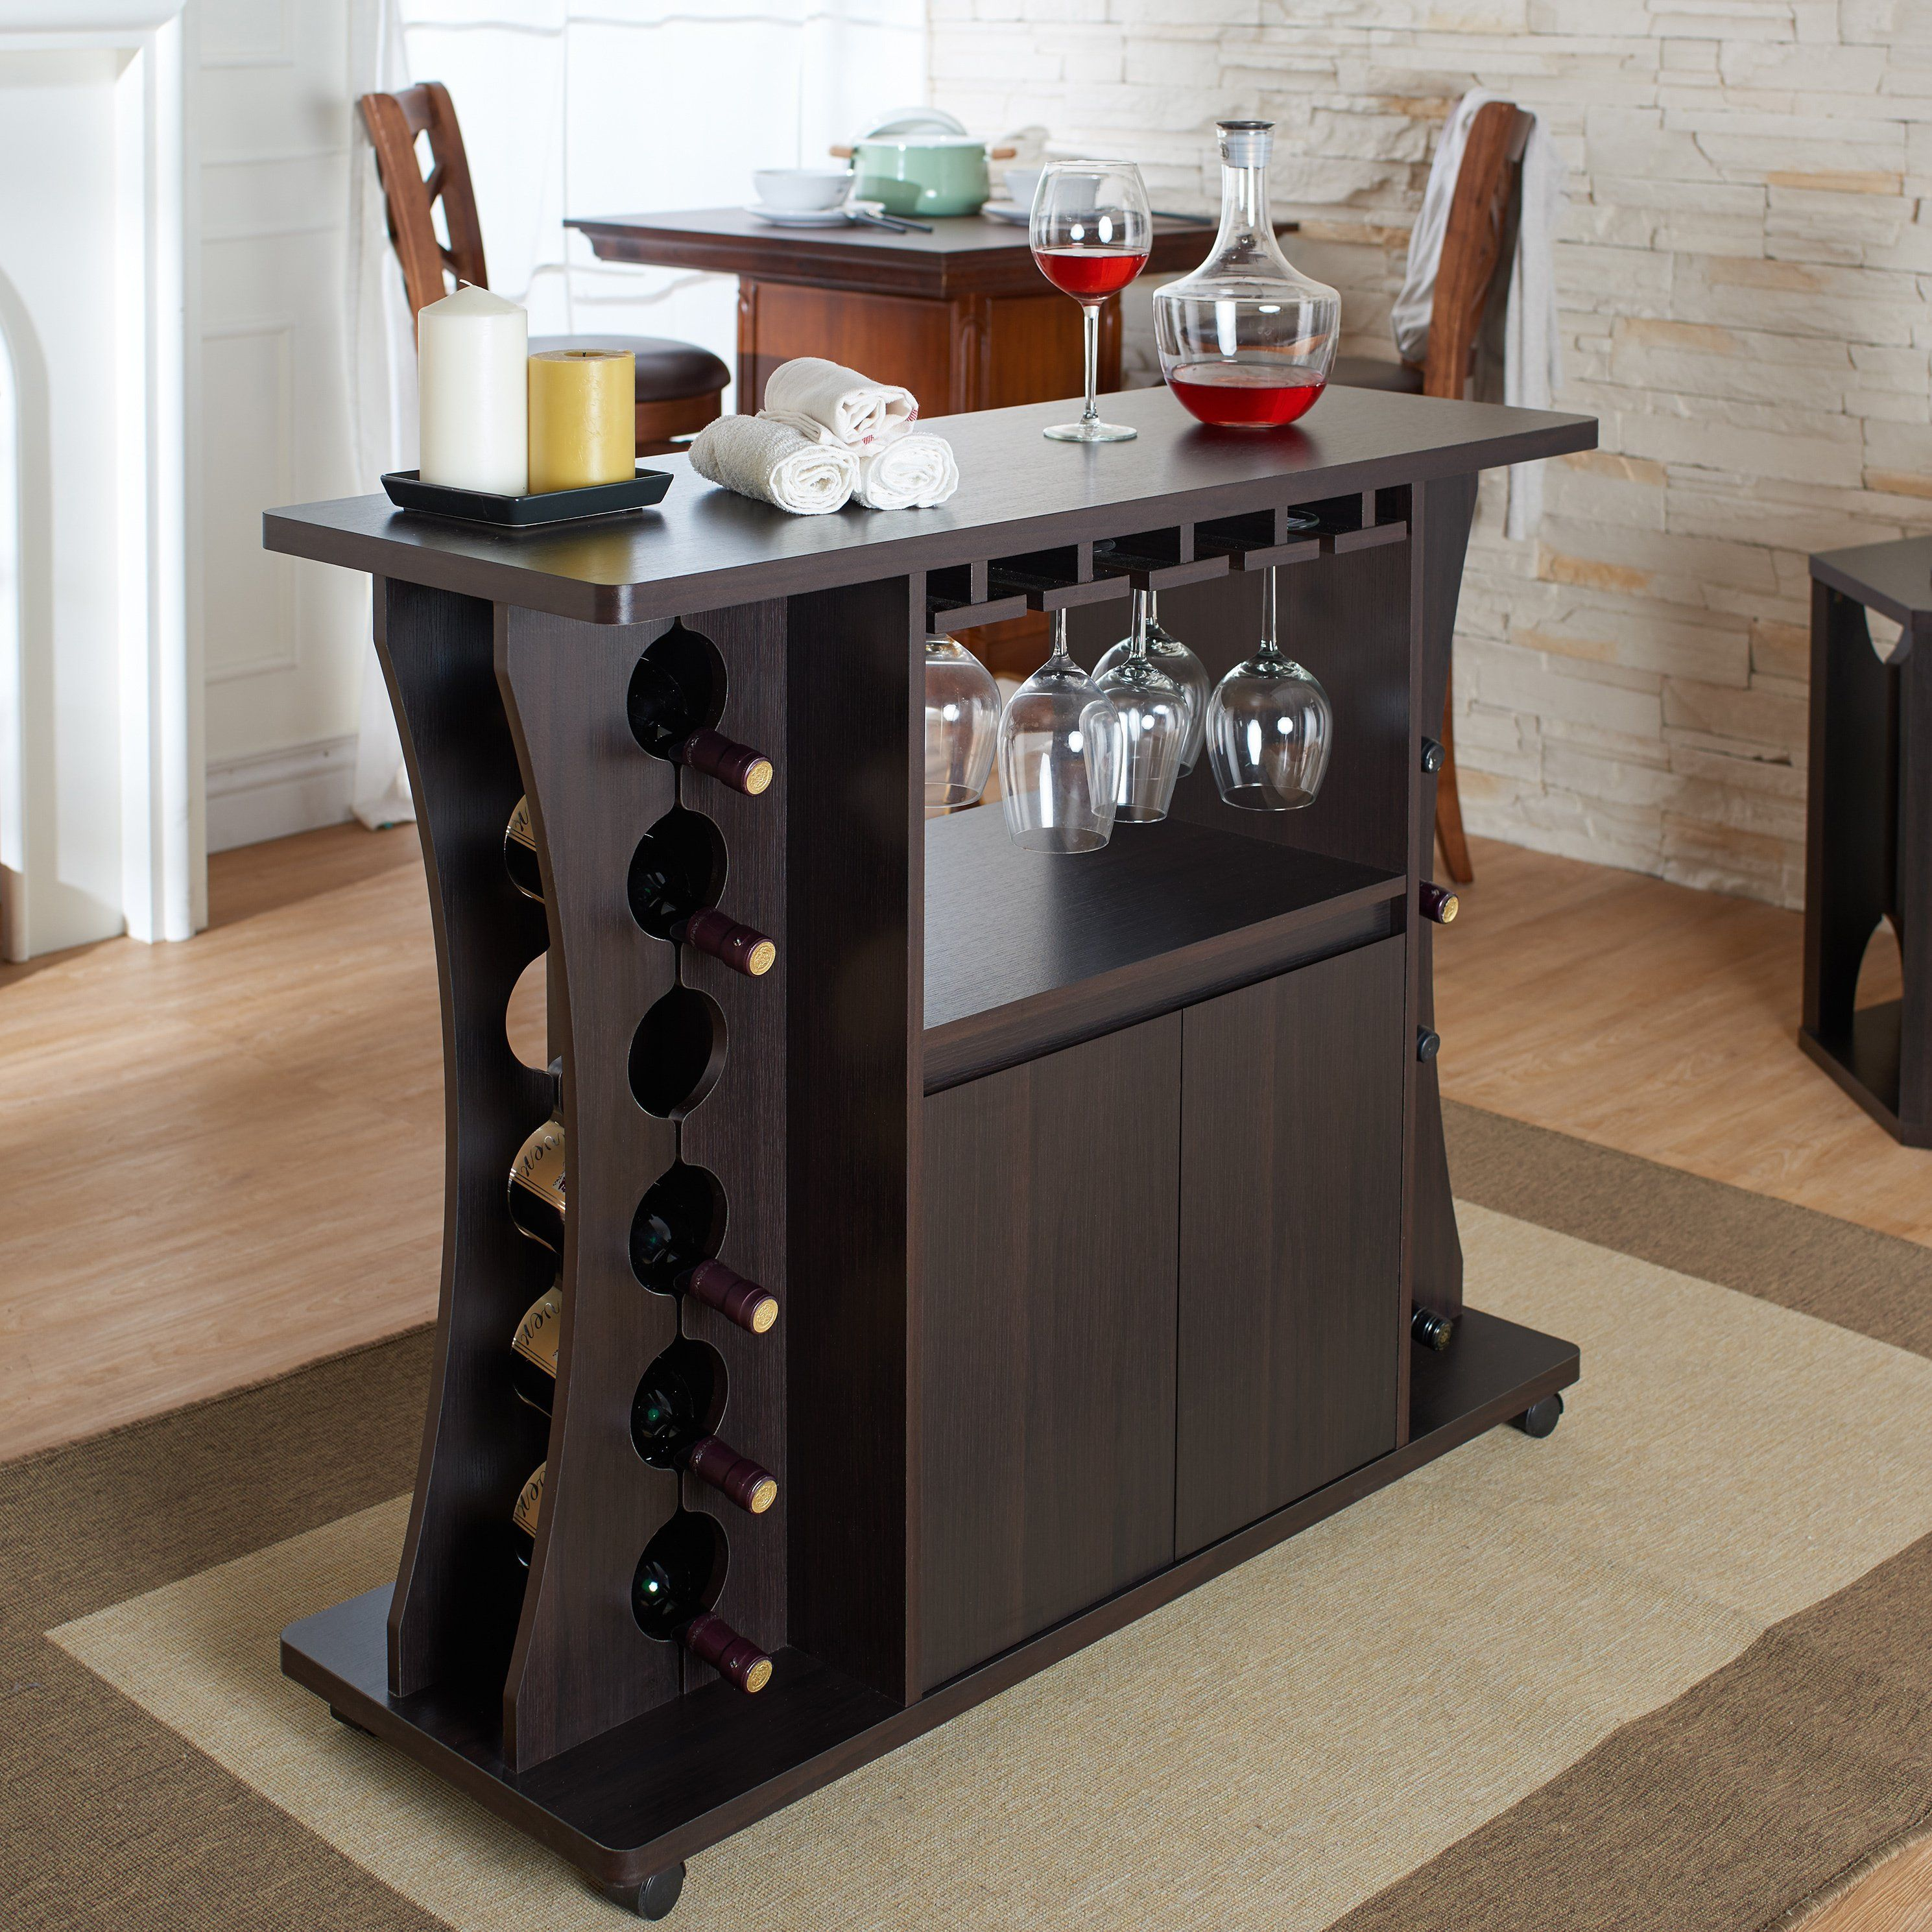 Porch Den Northlawn Espresso Buffet With Wine Rack intended for dimensions 2979 X 2979